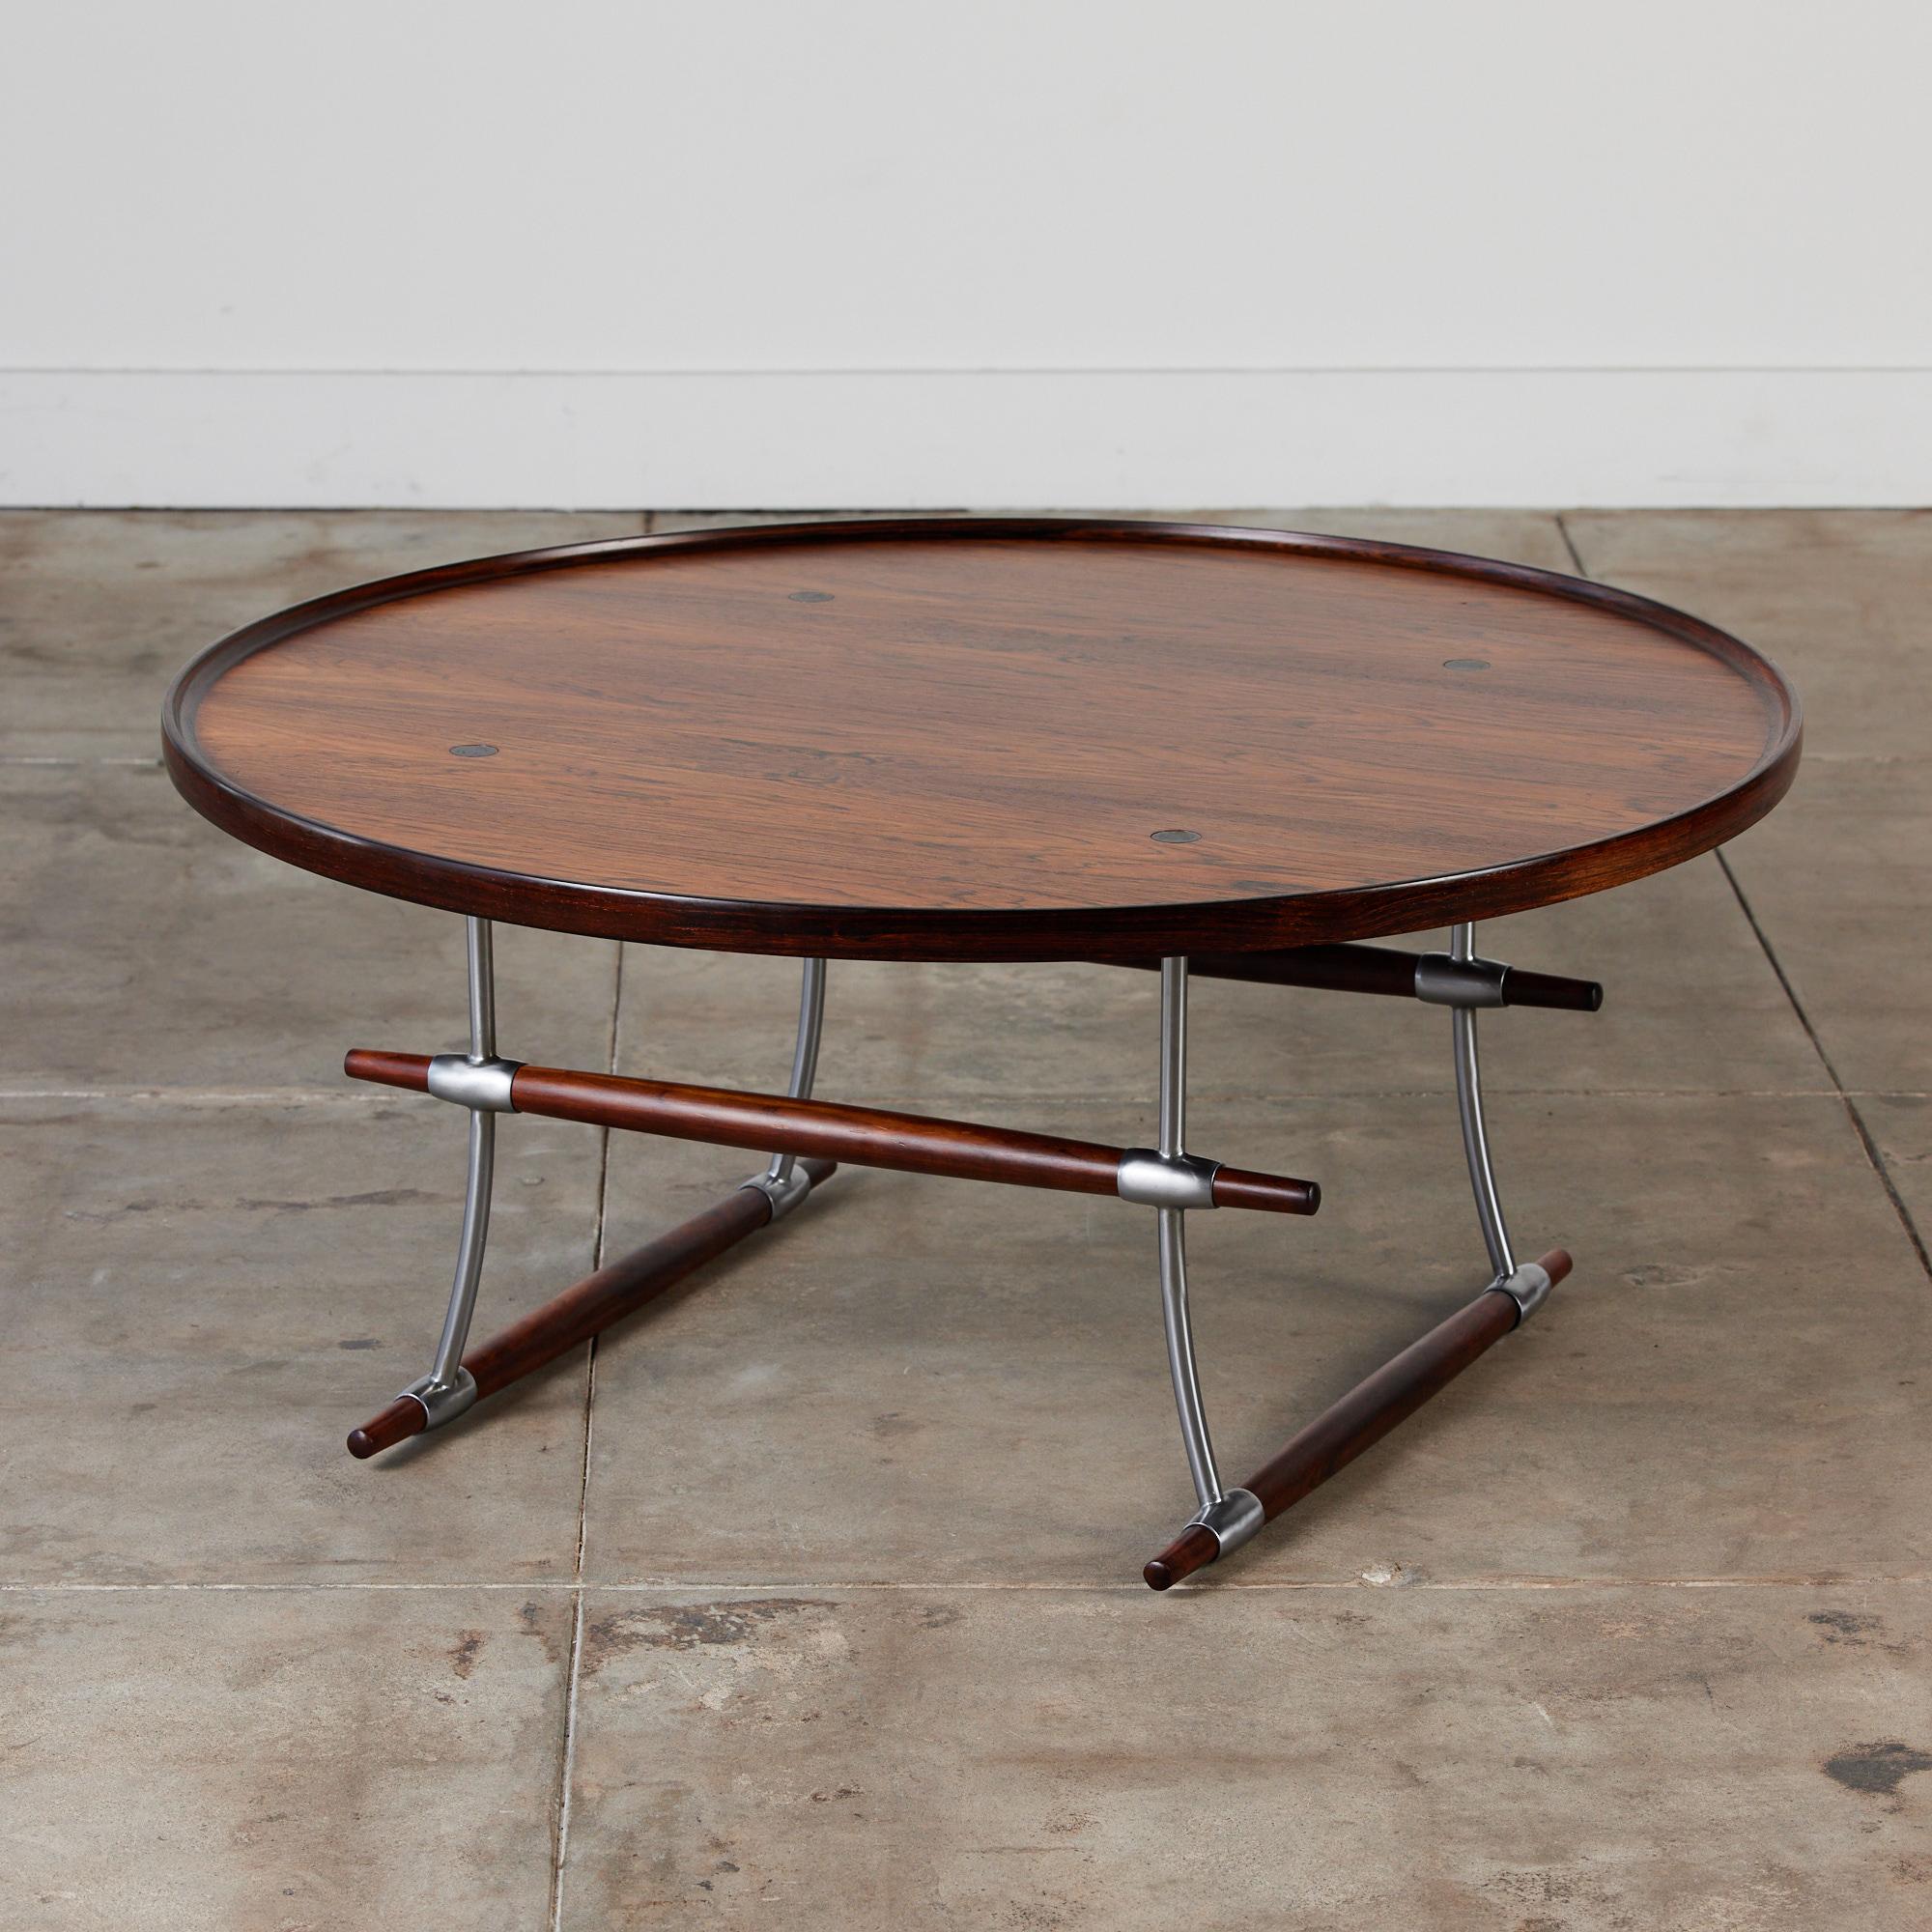 This coffee table by Jens H. Quistgaard for Nissen, c.1960s Denmark features a hand-oiled table top and frame composed of rich rosewood chrome plated steel. The table top has a raised edge around the perimeter. This table would pair perfectly with